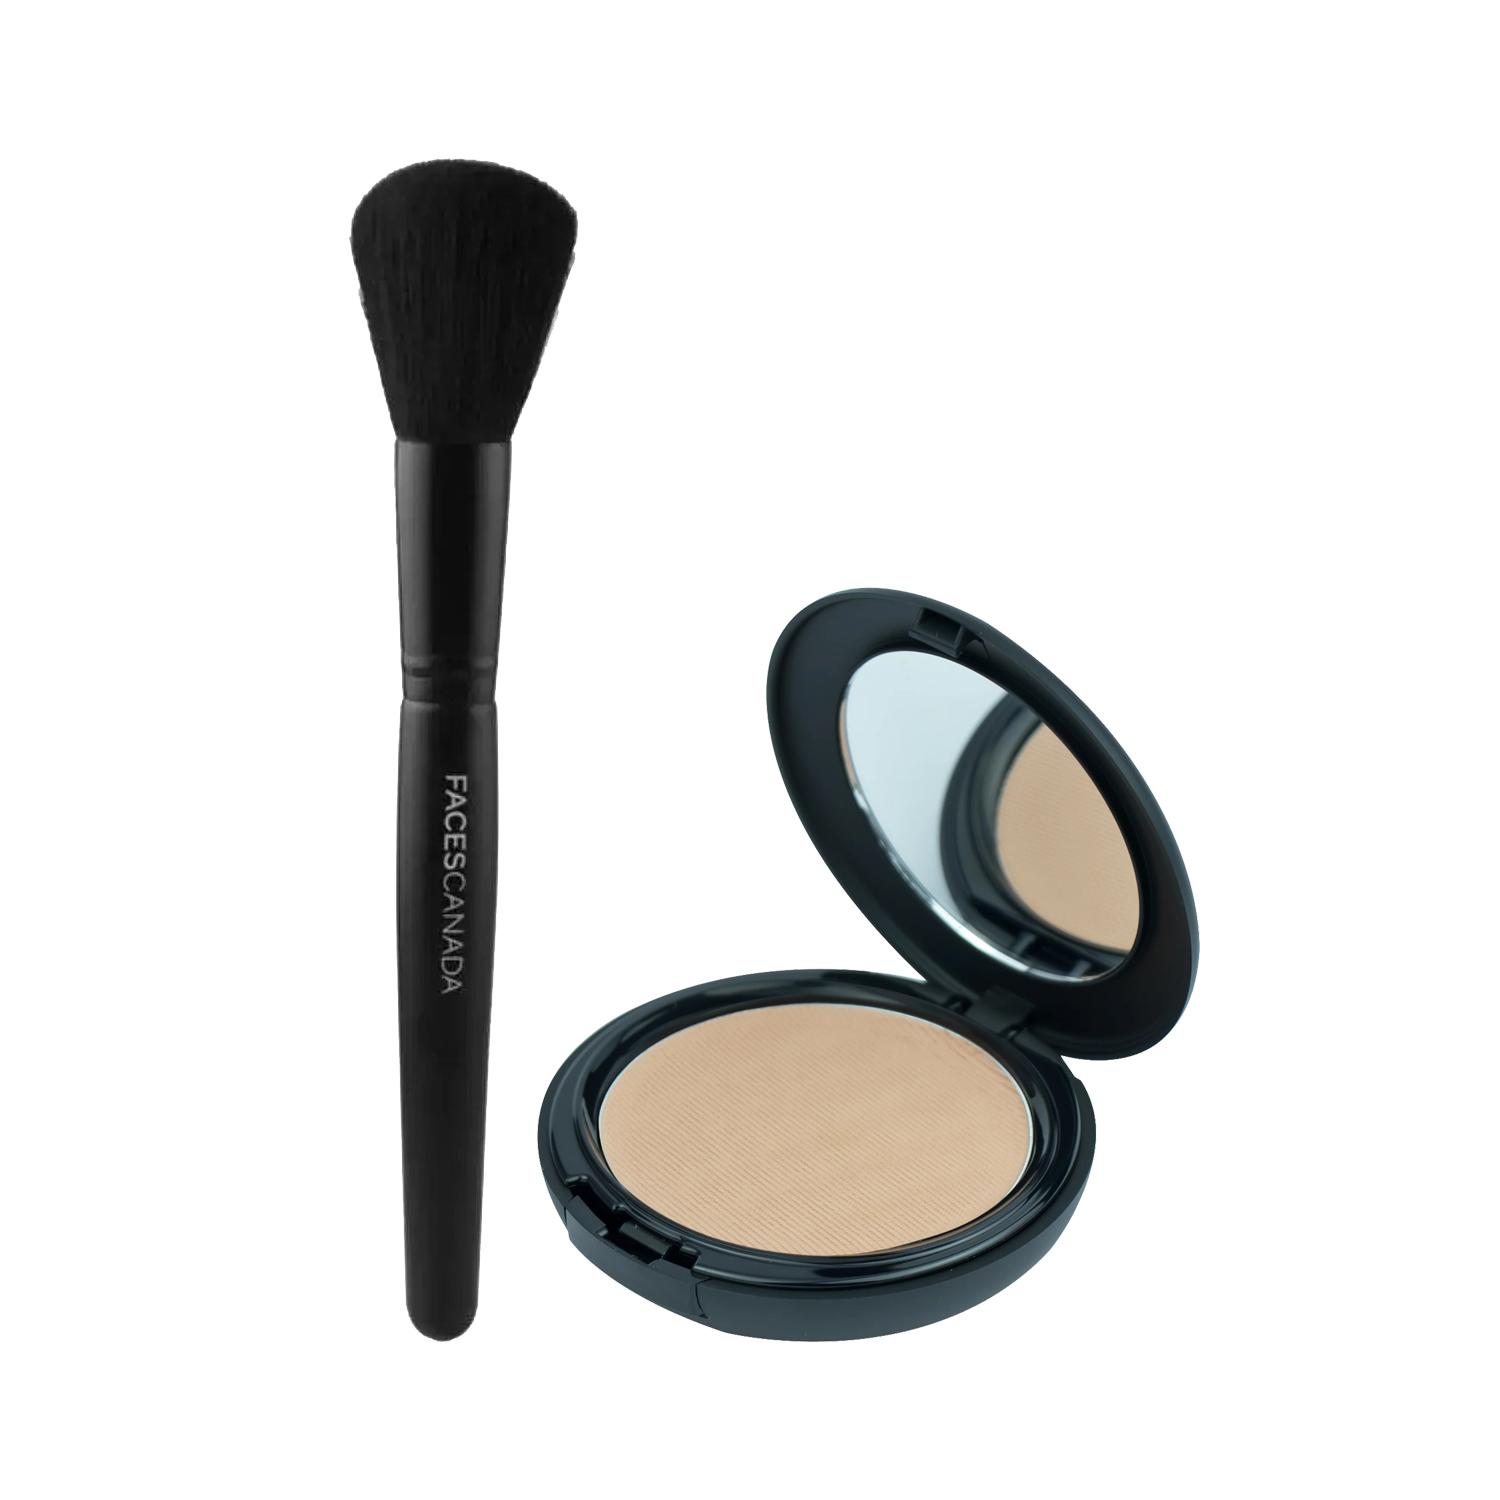 Faces Canada | Faces Canada Face Makeup Combo - Expert Cover Powder - Beige (9g) and 1 Powder Brush